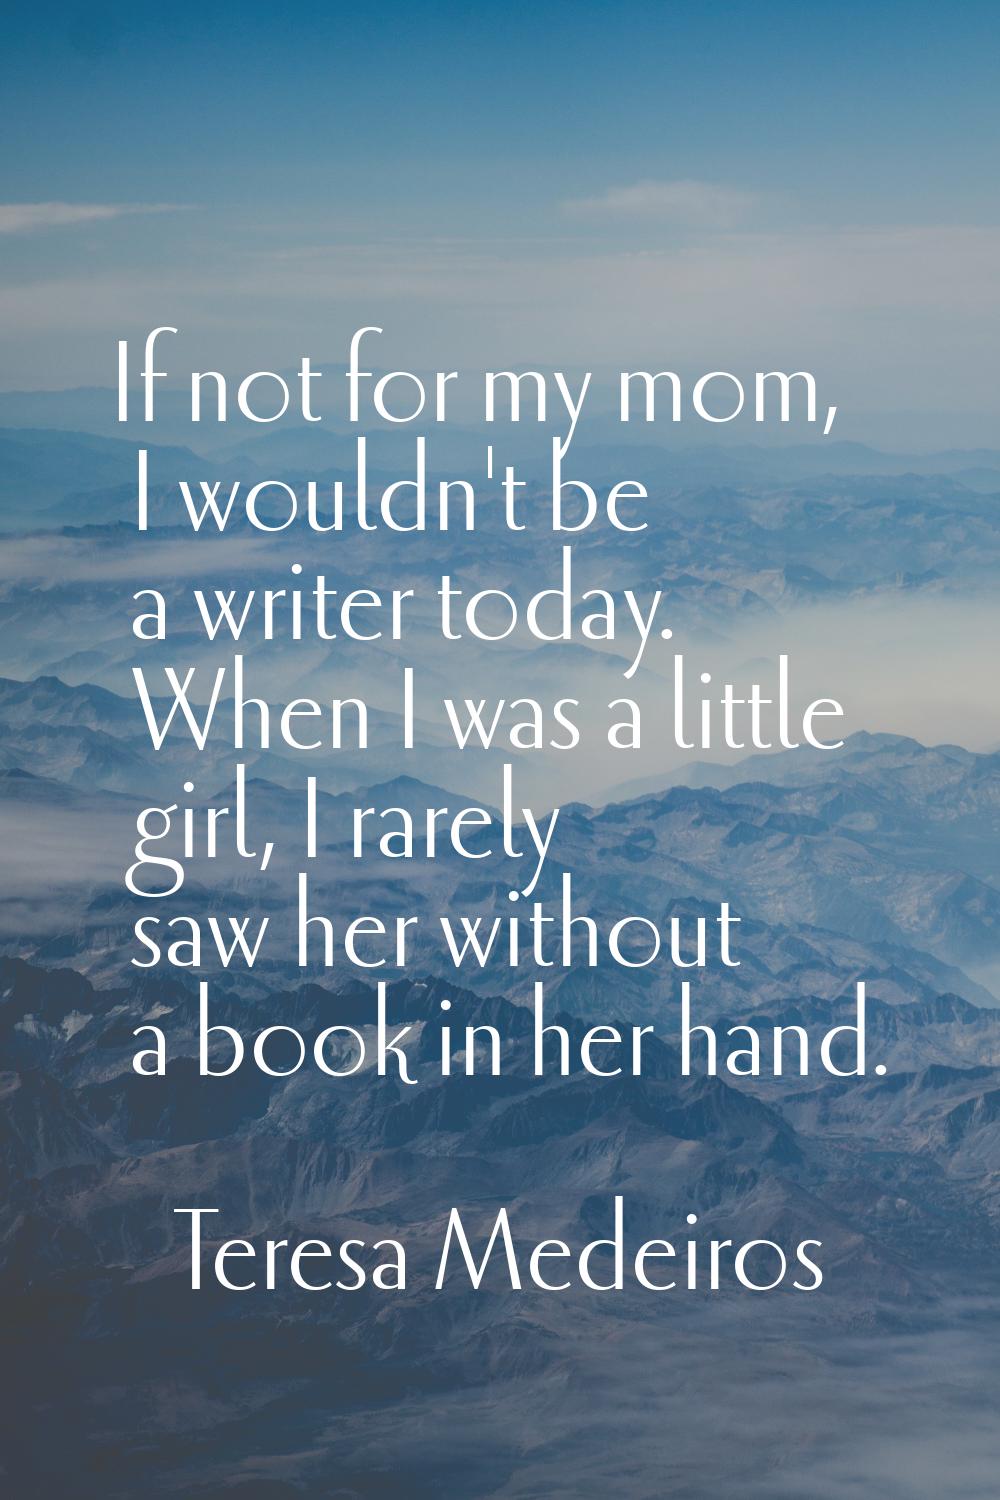 If not for my mom, I wouldn't be a writer today. When I was a little girl, I rarely saw her without